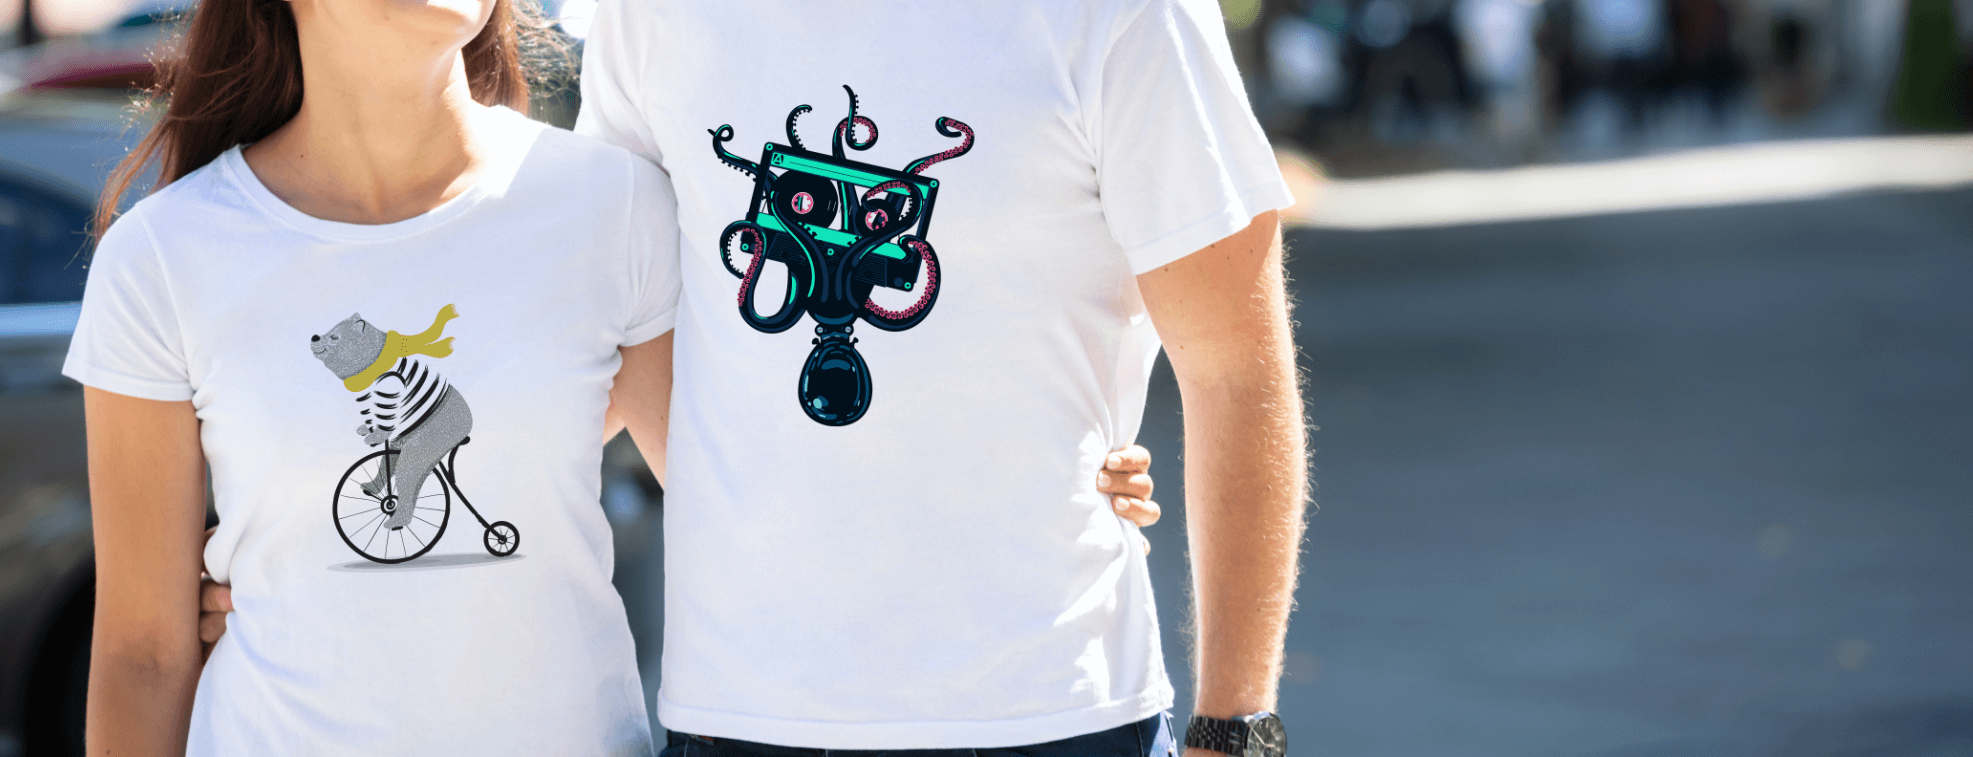 T-shirts design ideas with fun illustrations for women and men